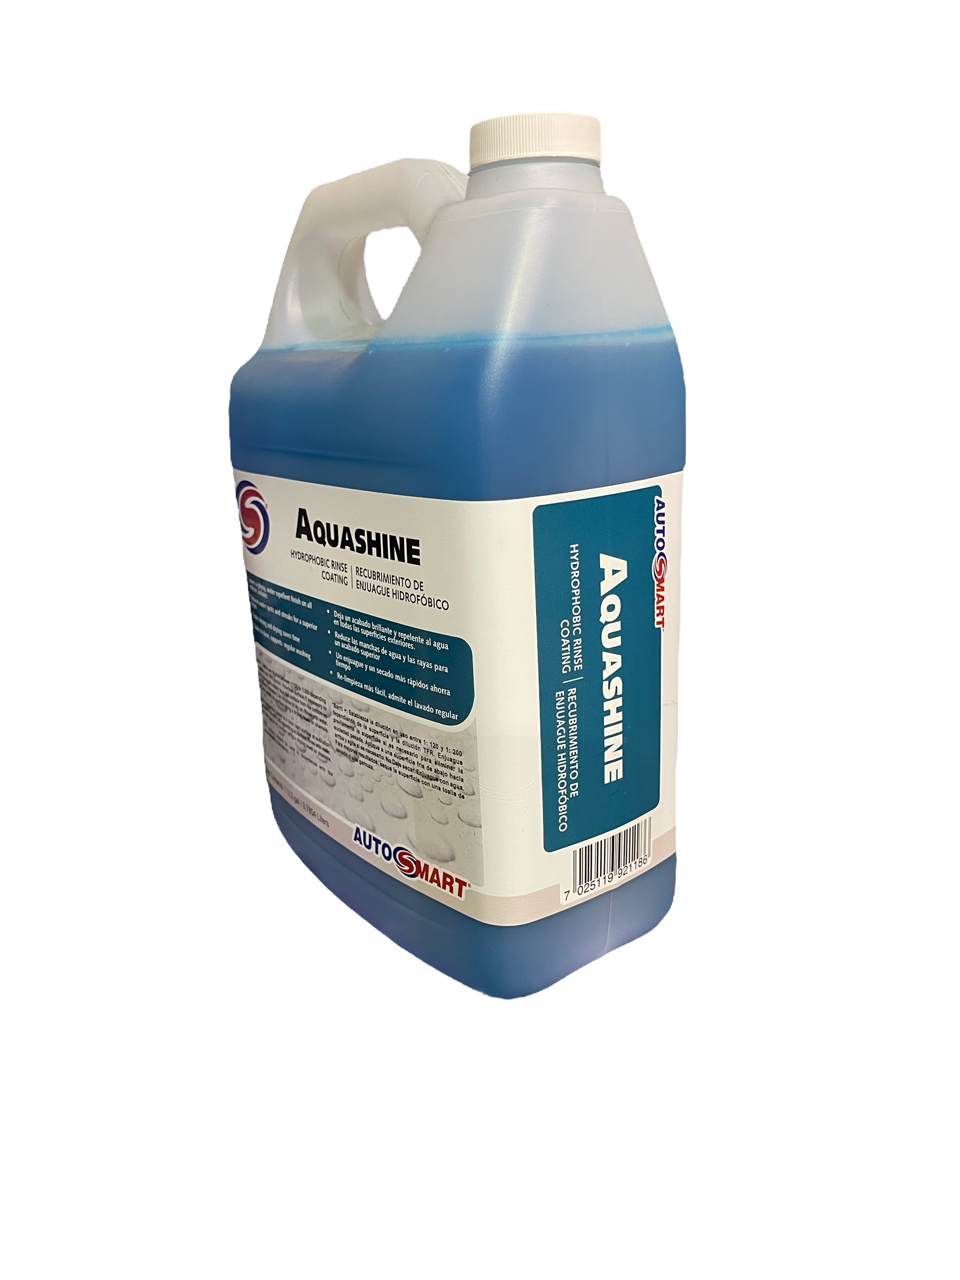 Aquashine - Hydrophobic Rinse Coating 1galA hydrophobic rinse coating concentrate which protects paintwork and trim and leaves a glossy, streak-free finish. Ideal for use in the wash process for fewer water spots and better water beading. Dilutes up to 25